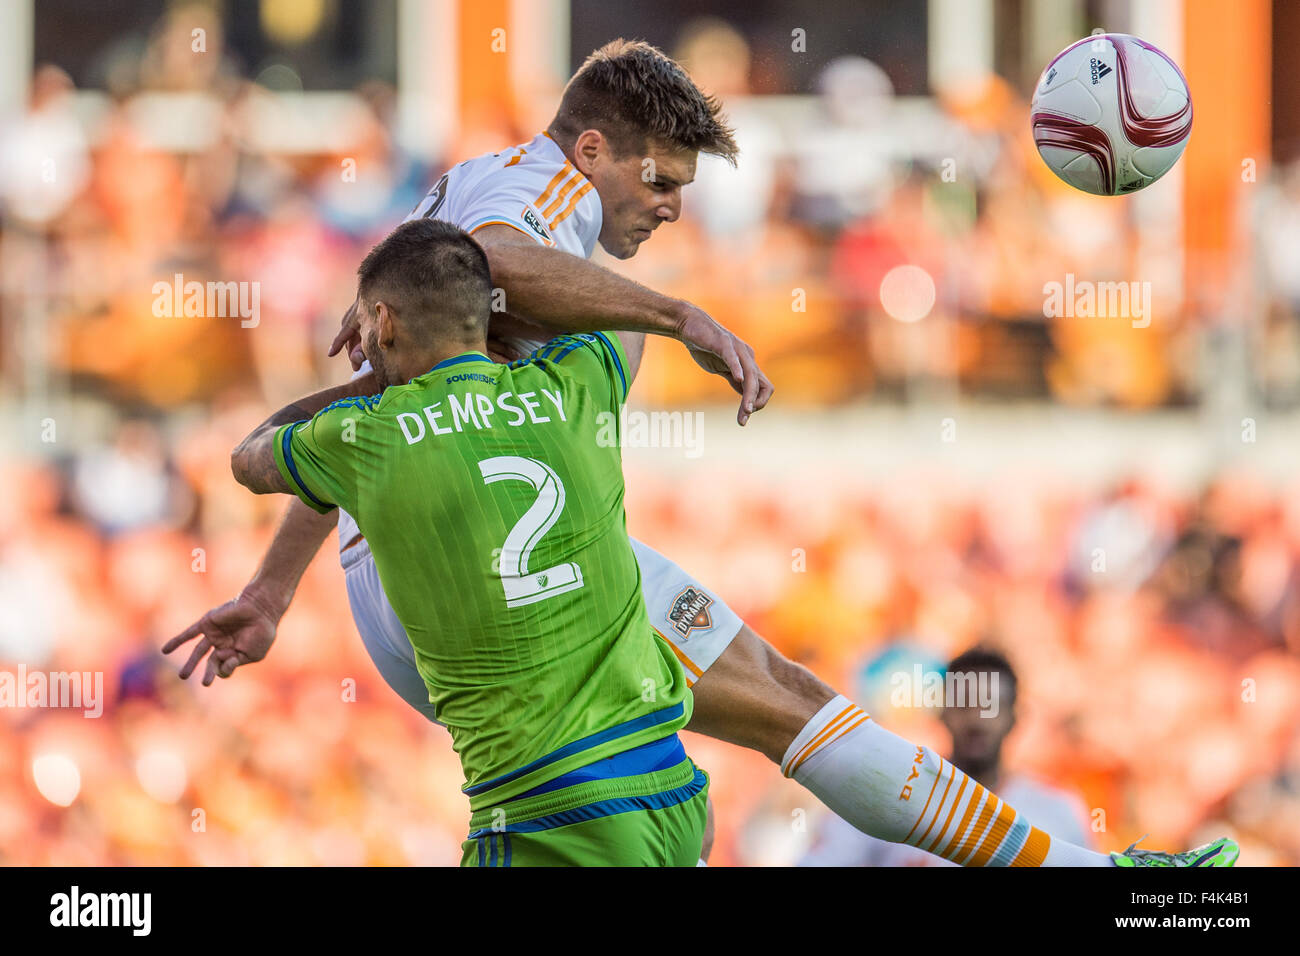 Houston, Texas, USA. 18th Oct, 2015. Seattle Sounders FC forward CLINT DEMPSEY (2) collides with Houston Dynamo defender DAVID HORST (18) after Horst heads the ball during the 2nd half of an MLS game between the Houston Dynamo and the Seattle Sounders at BBVA Compass Stadium. © Trask Smith/ZUMA Wire/Alamy Live News Stock Photo